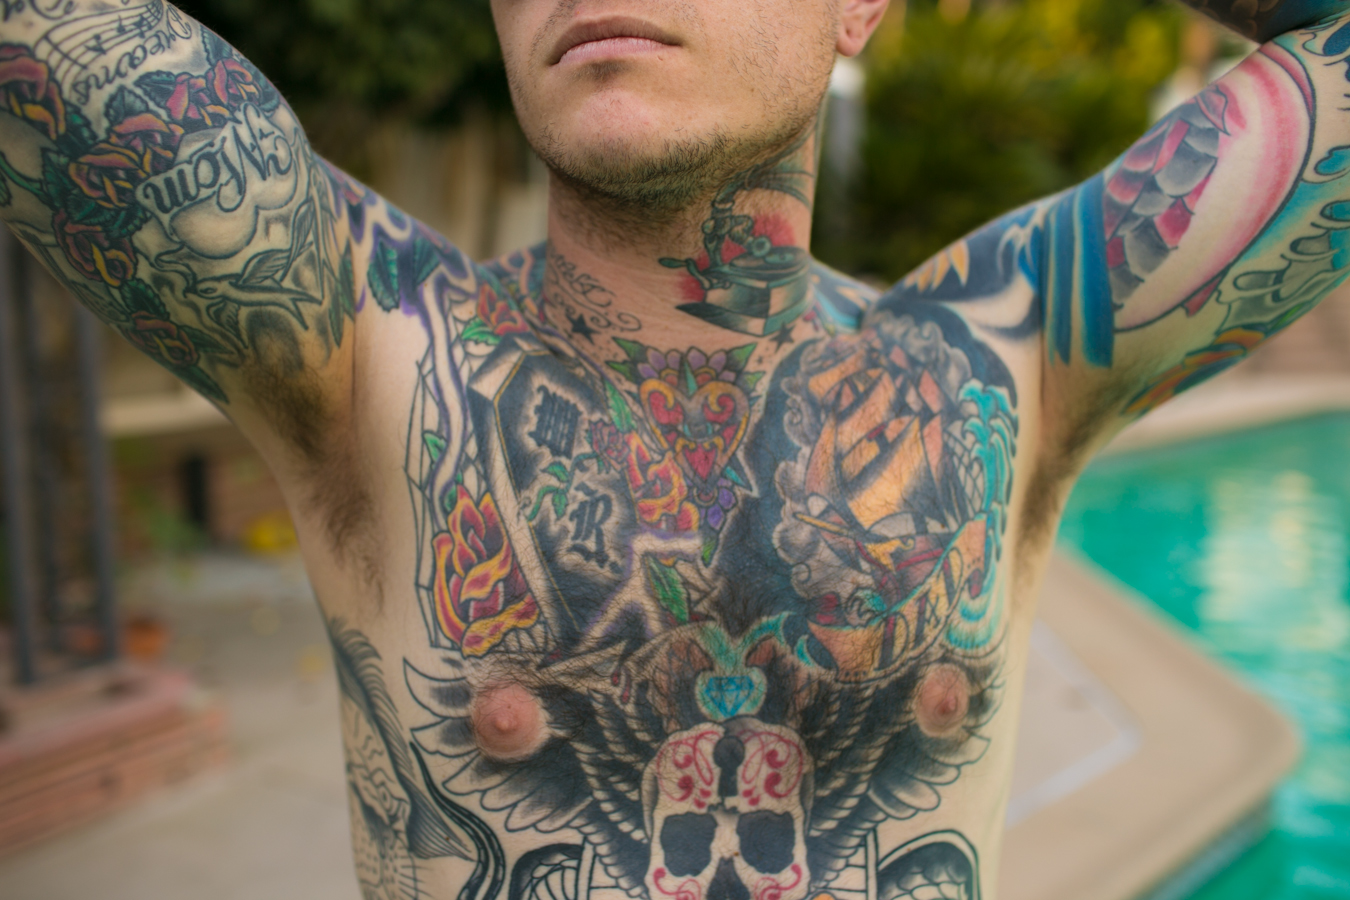 Meaningful Ink: Pepp Athletes Share the Stories Behind Their Tattoos -  Pepperdine Graphic